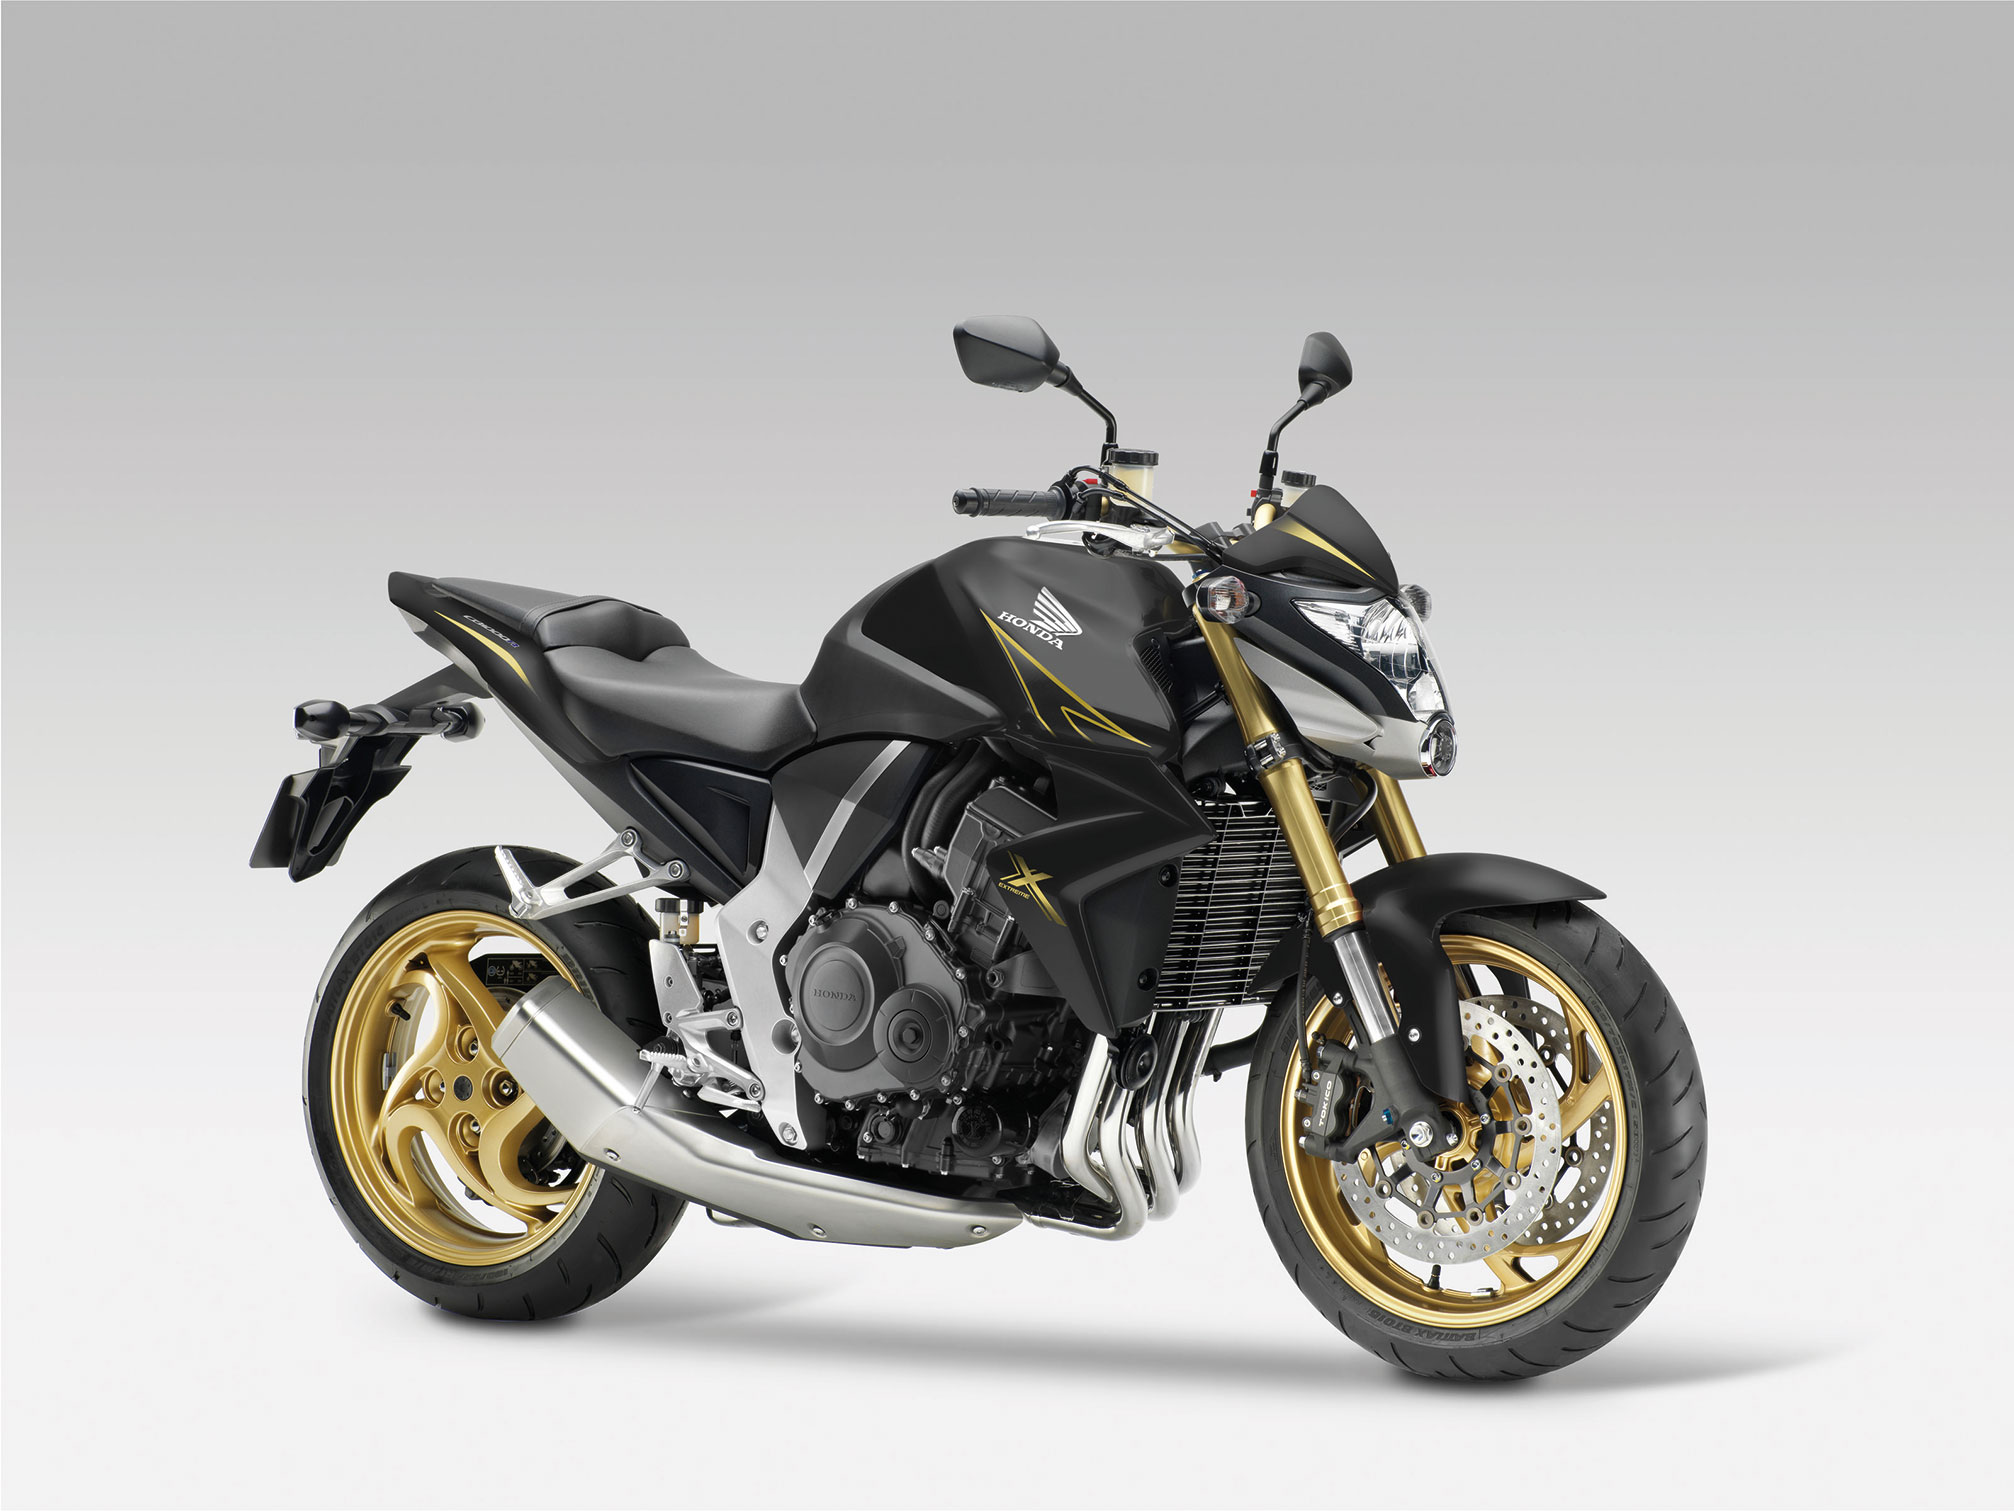 2011 Honda CB1000R Review Specs, mpg and Price - Top Speed 